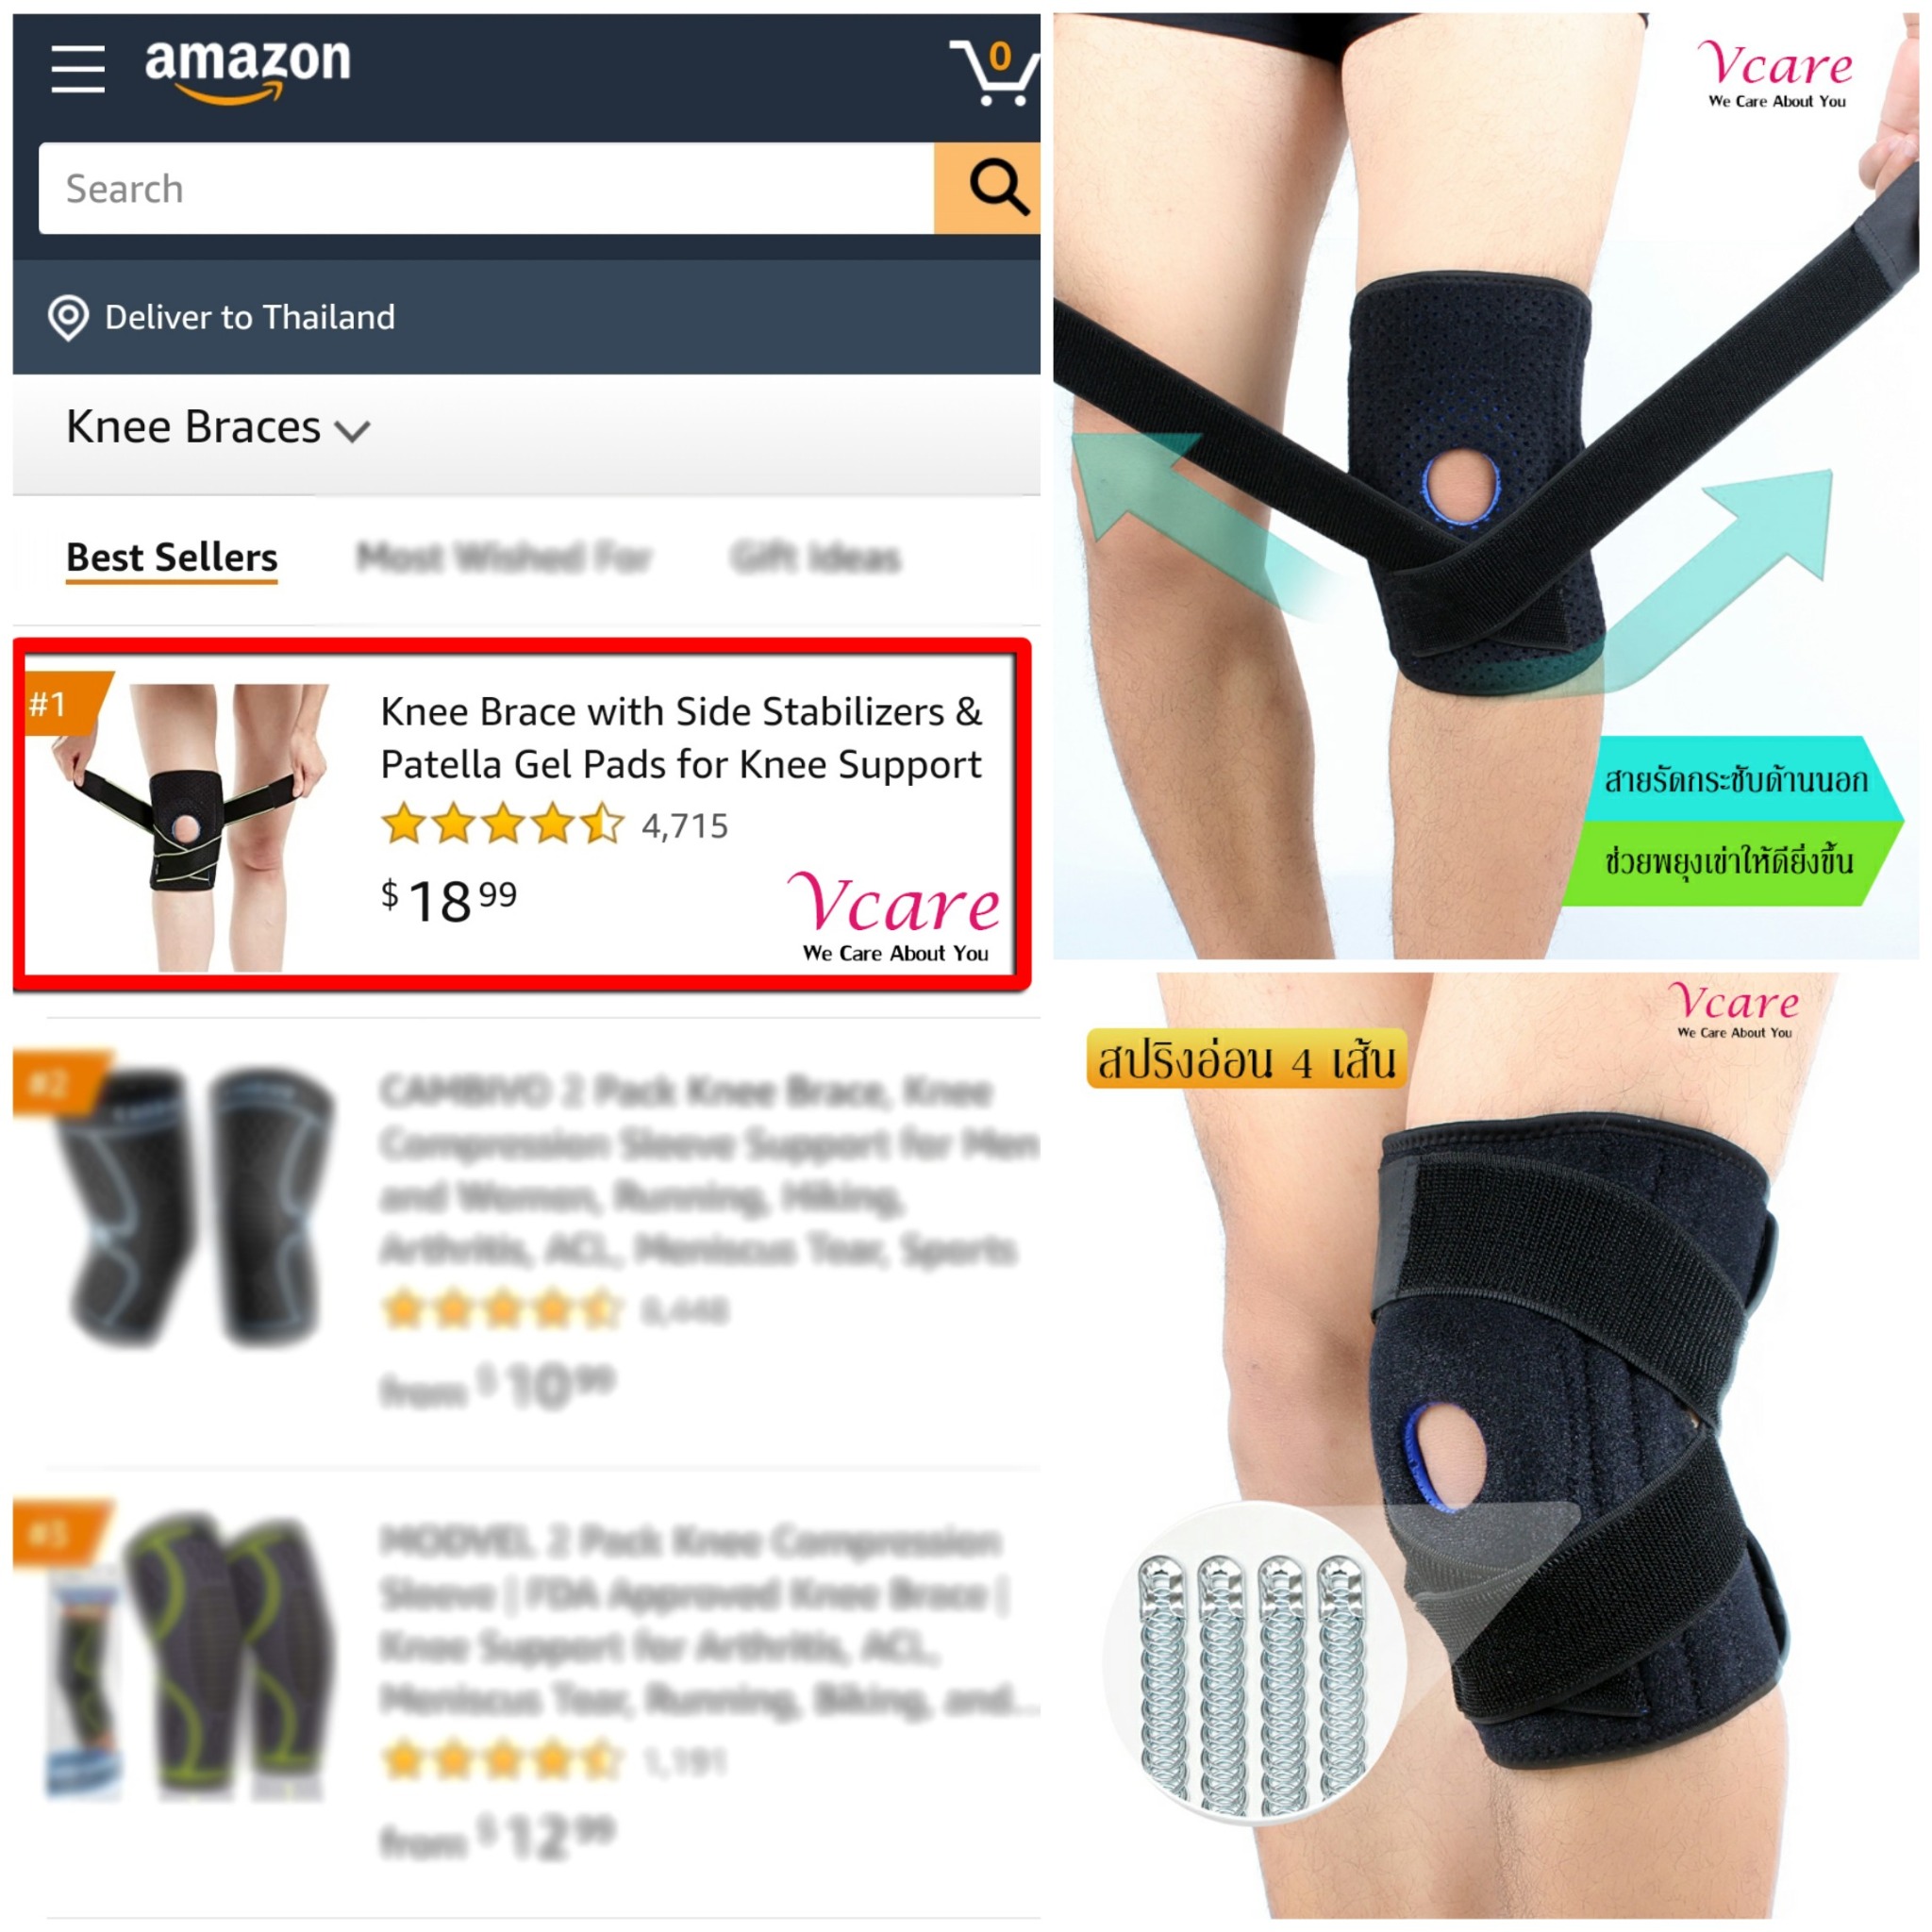 get_the_best_Amazon Usa_ad